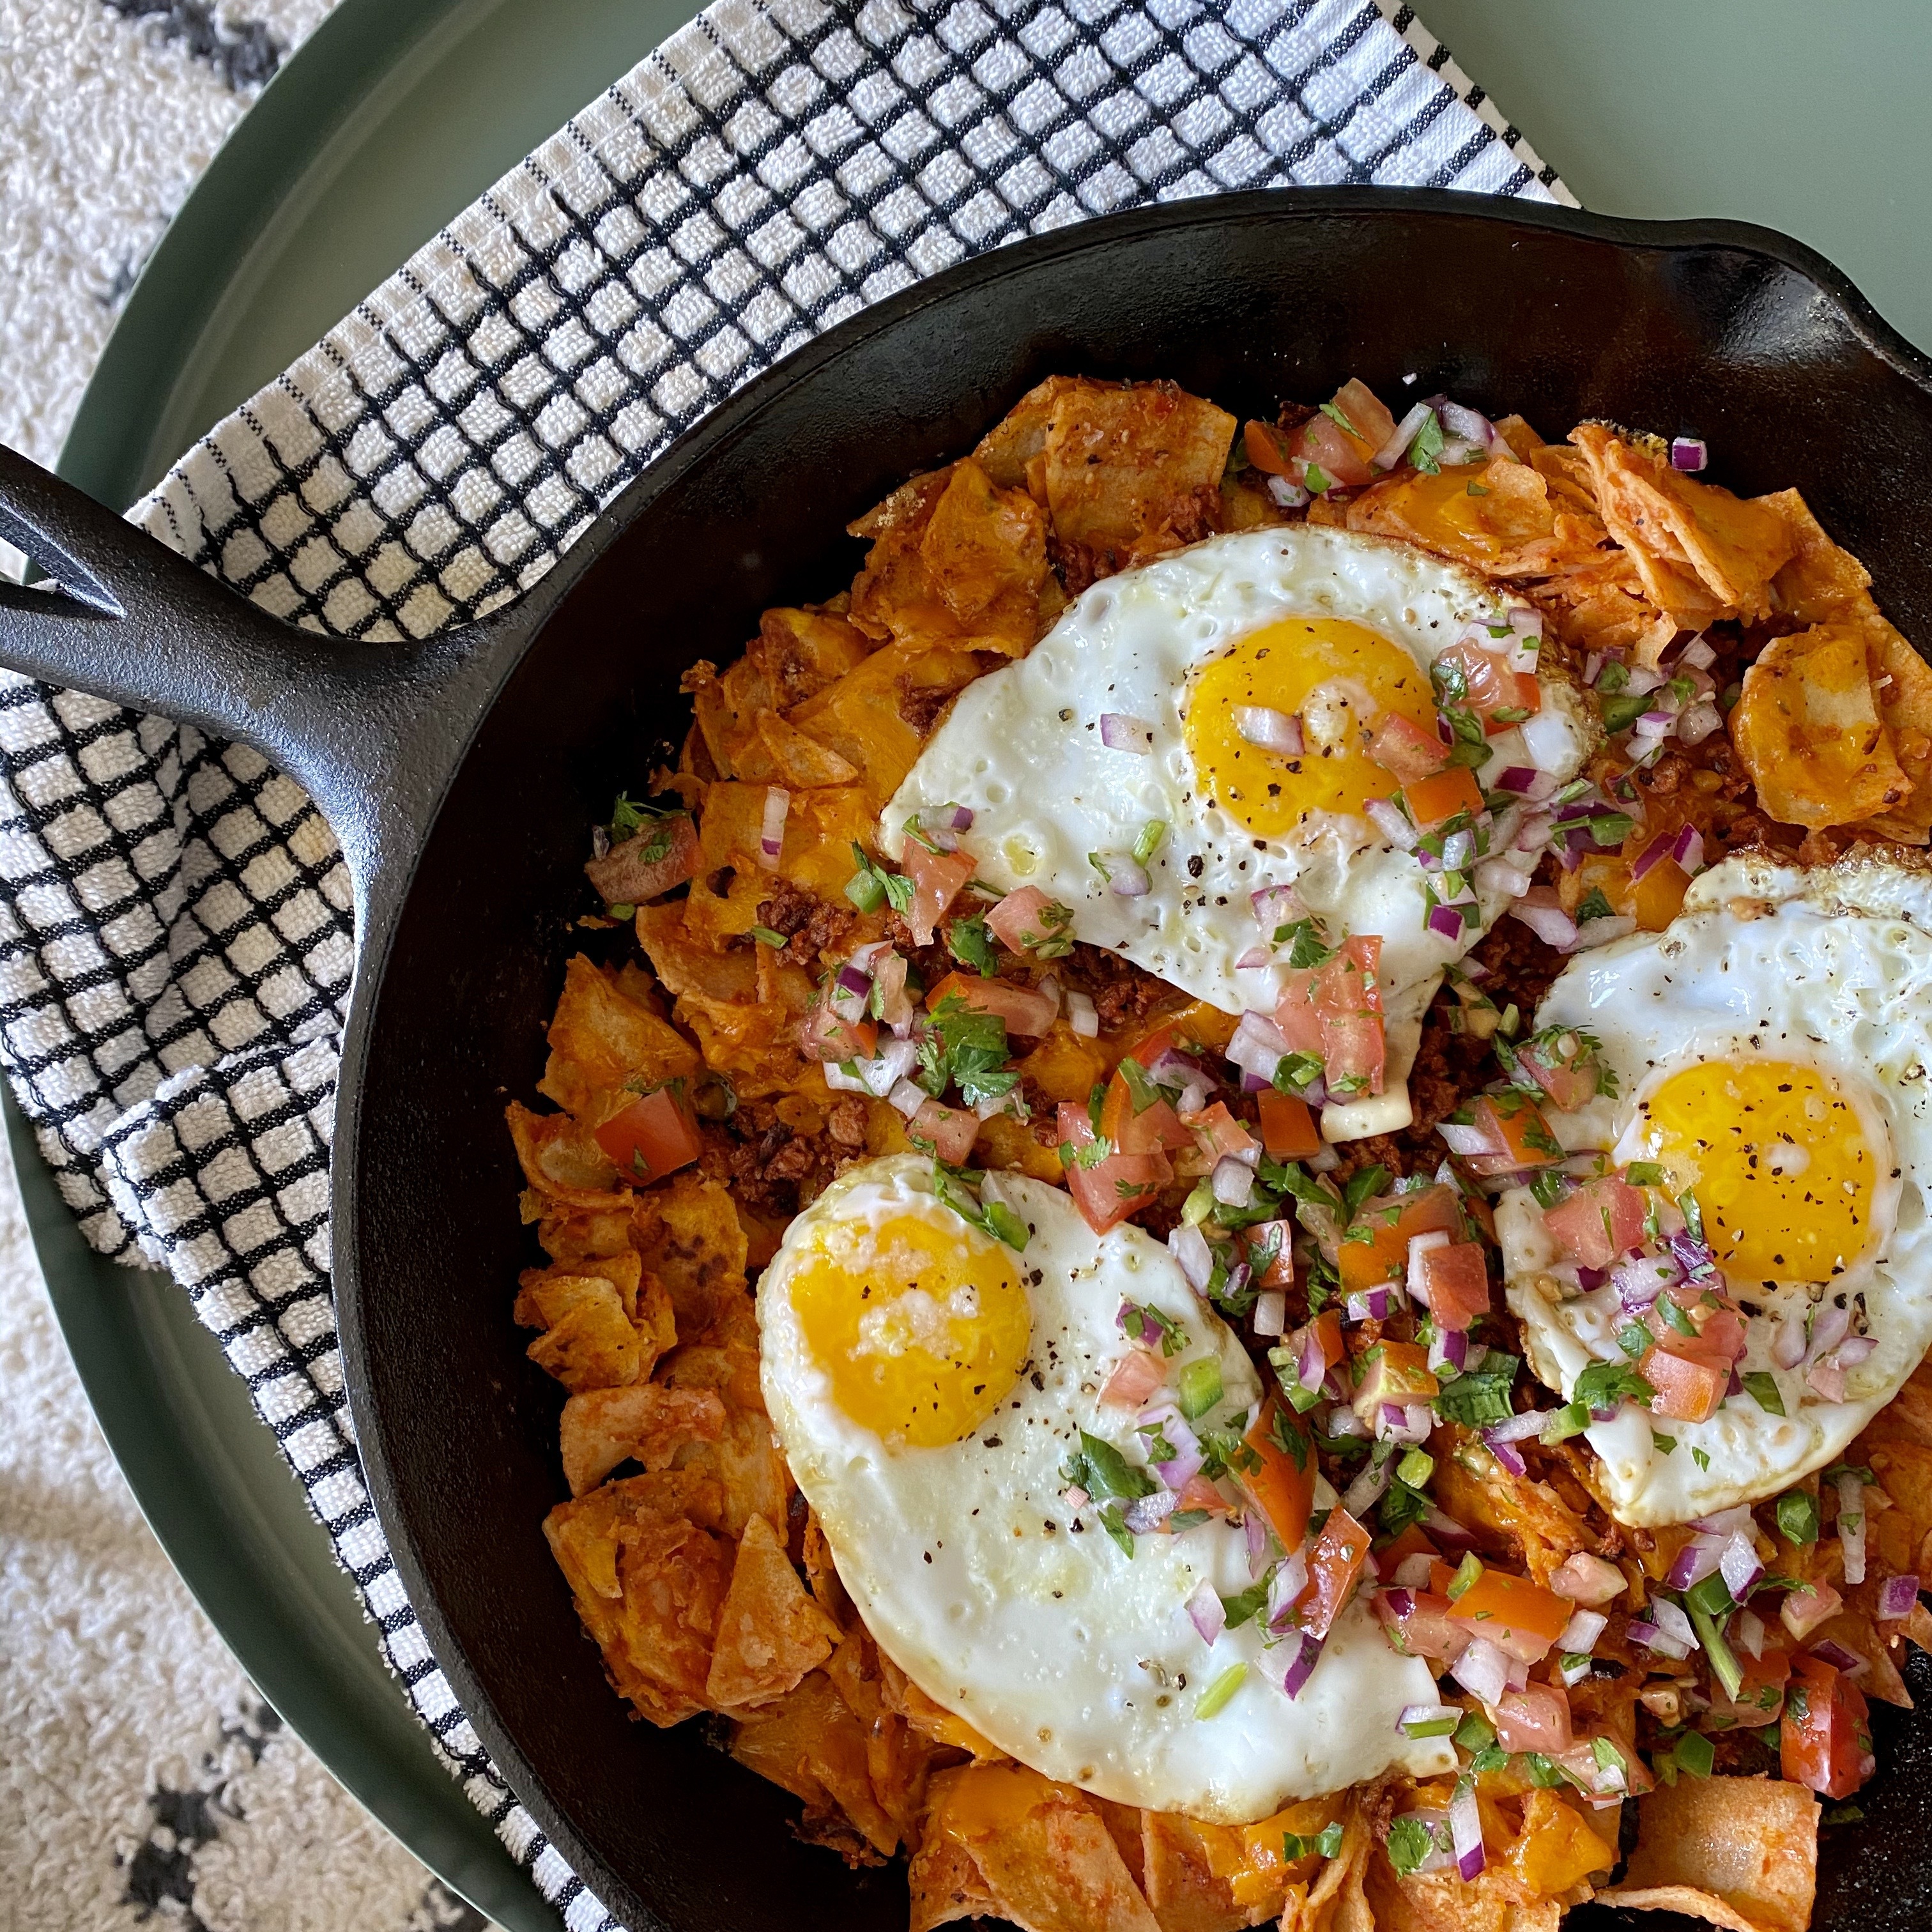 Photo of chilaquiles by Jae Thomas.